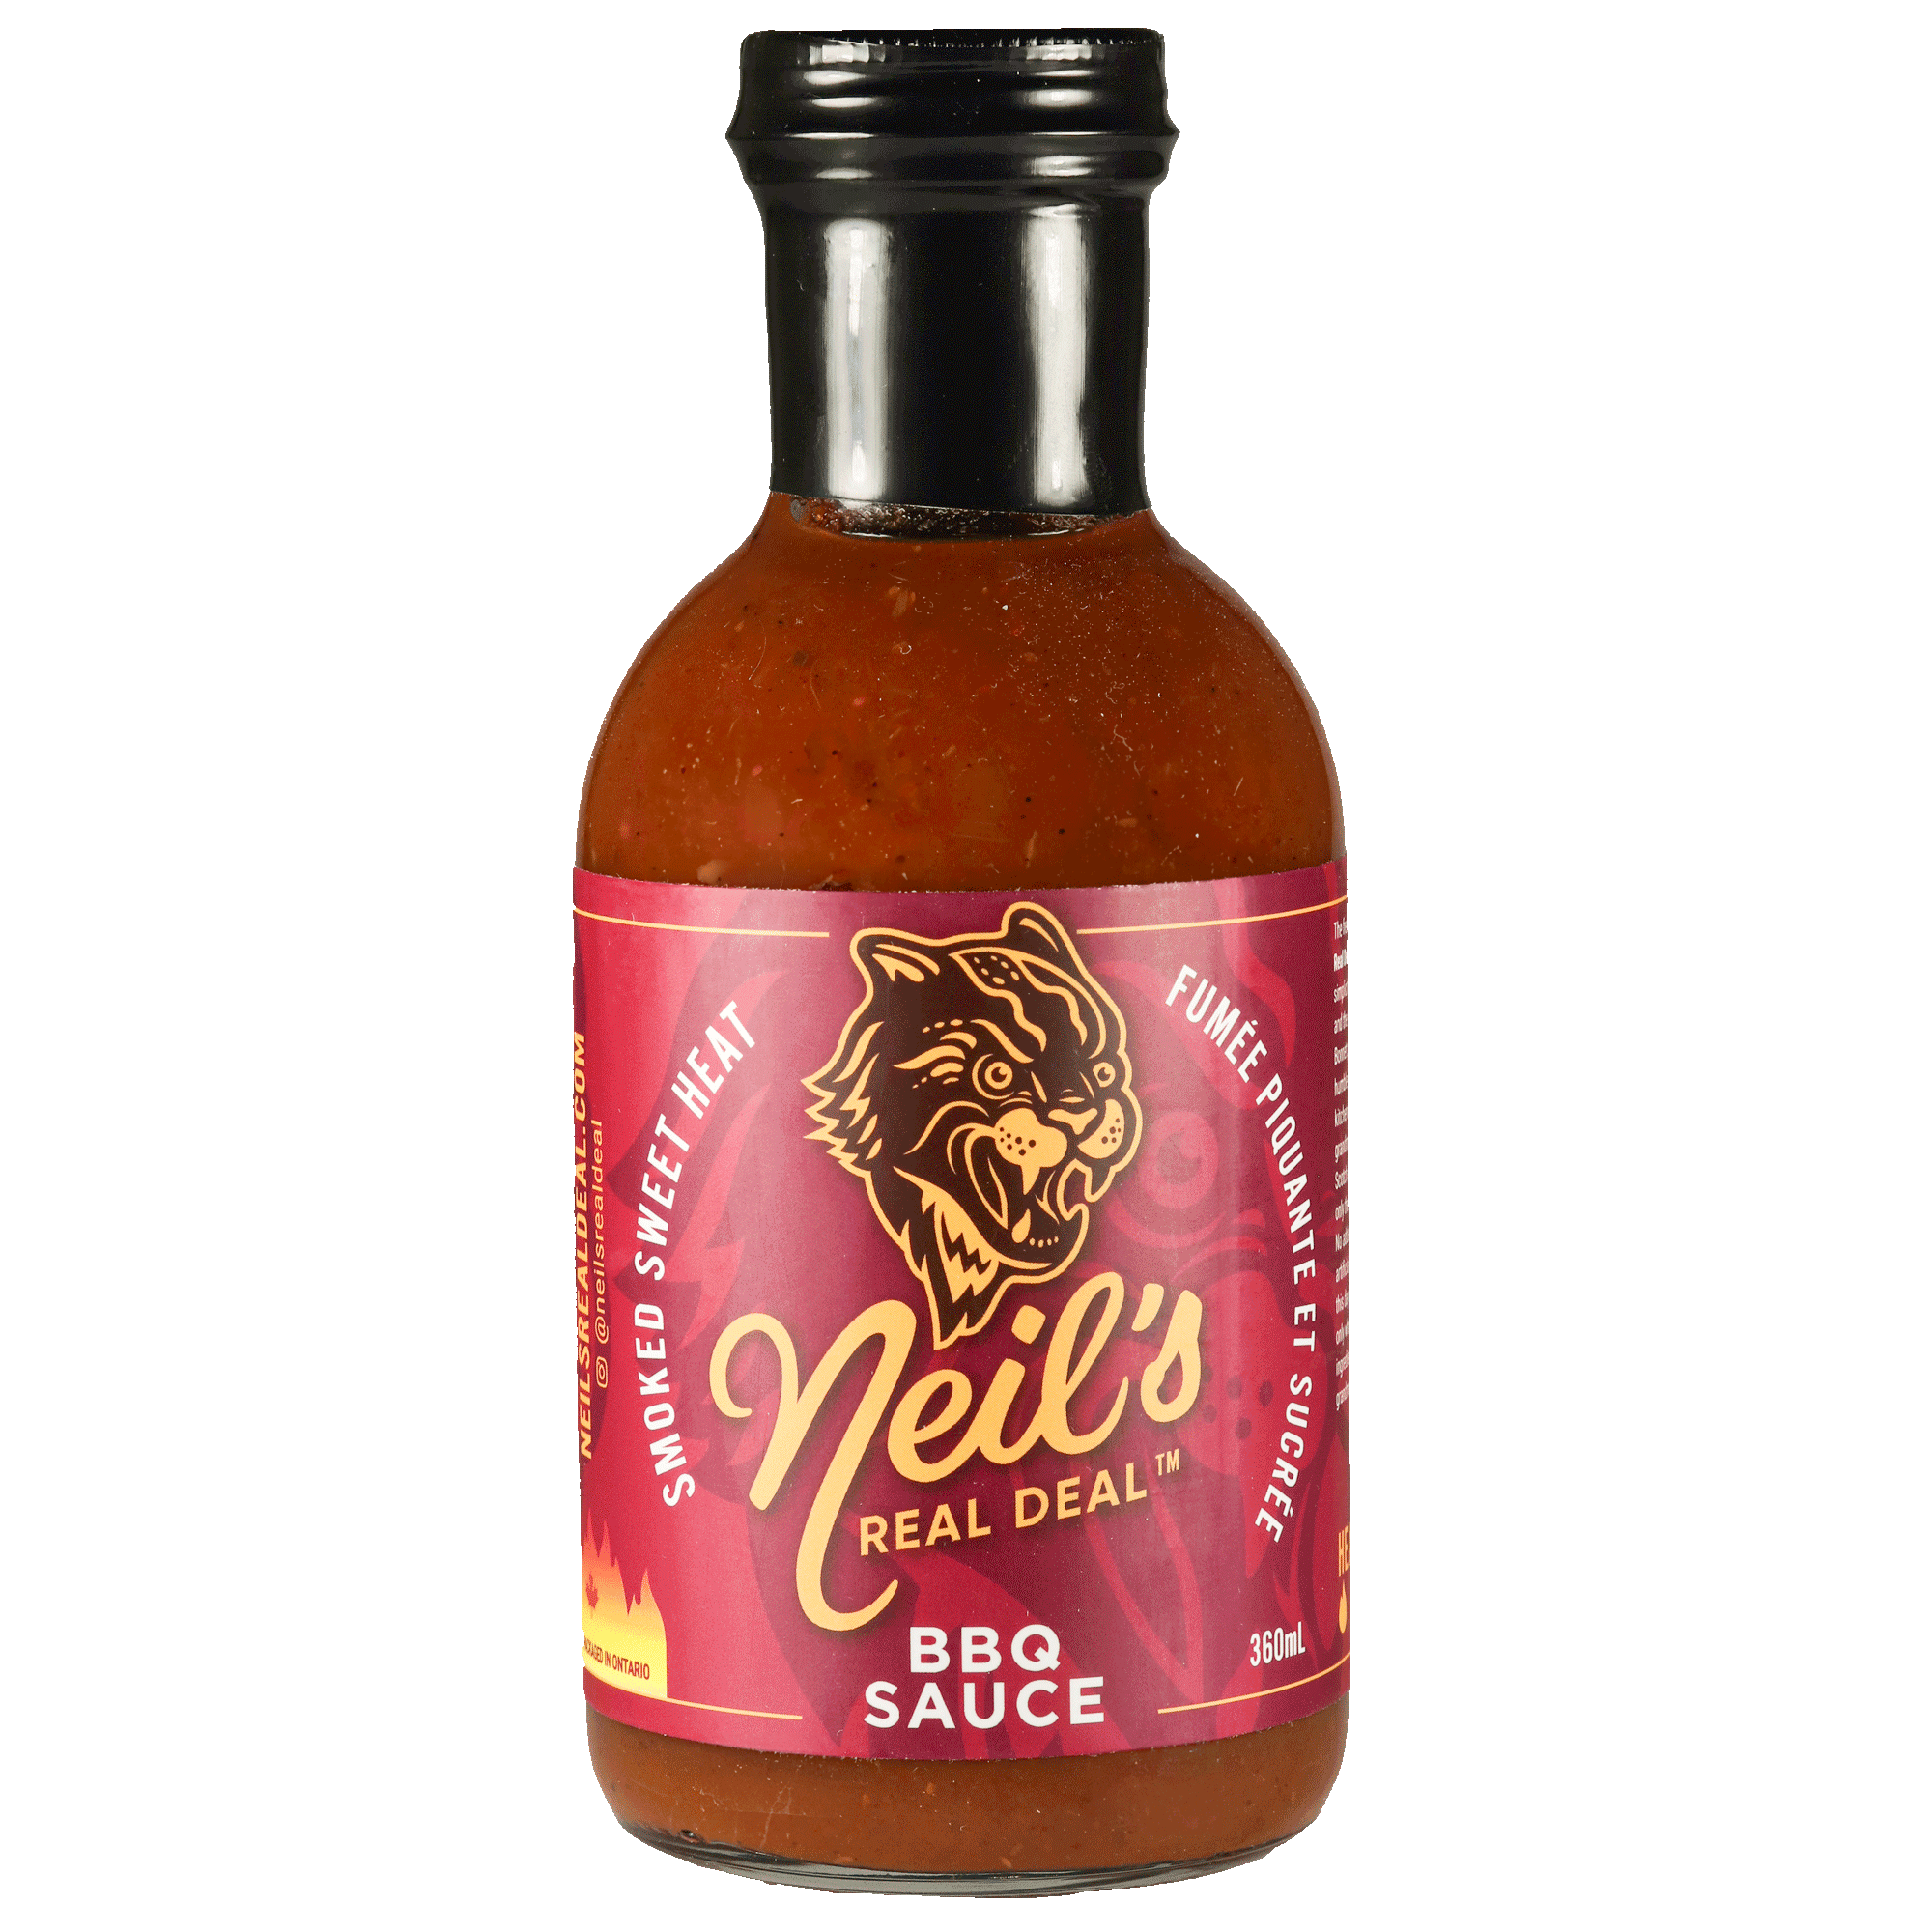 Smoked Sweet Heat BBQ Sauce - Neil's Real Deal